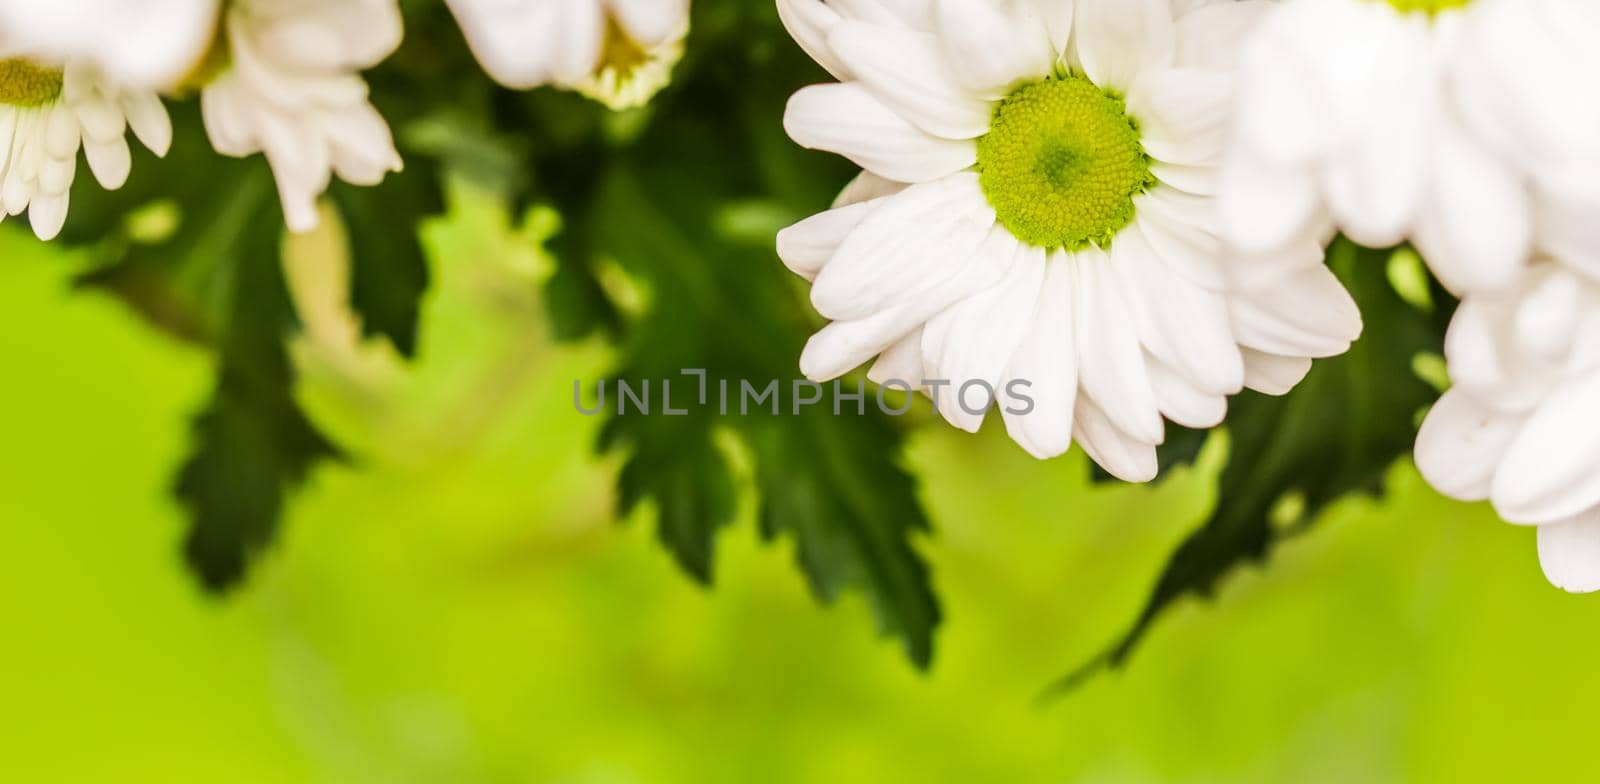 Soft focus, retro art, vintage card and botanical concept - Abstract floral background, white chrysanthemum flower petals. Macro flowers backdrop for holiday brand design